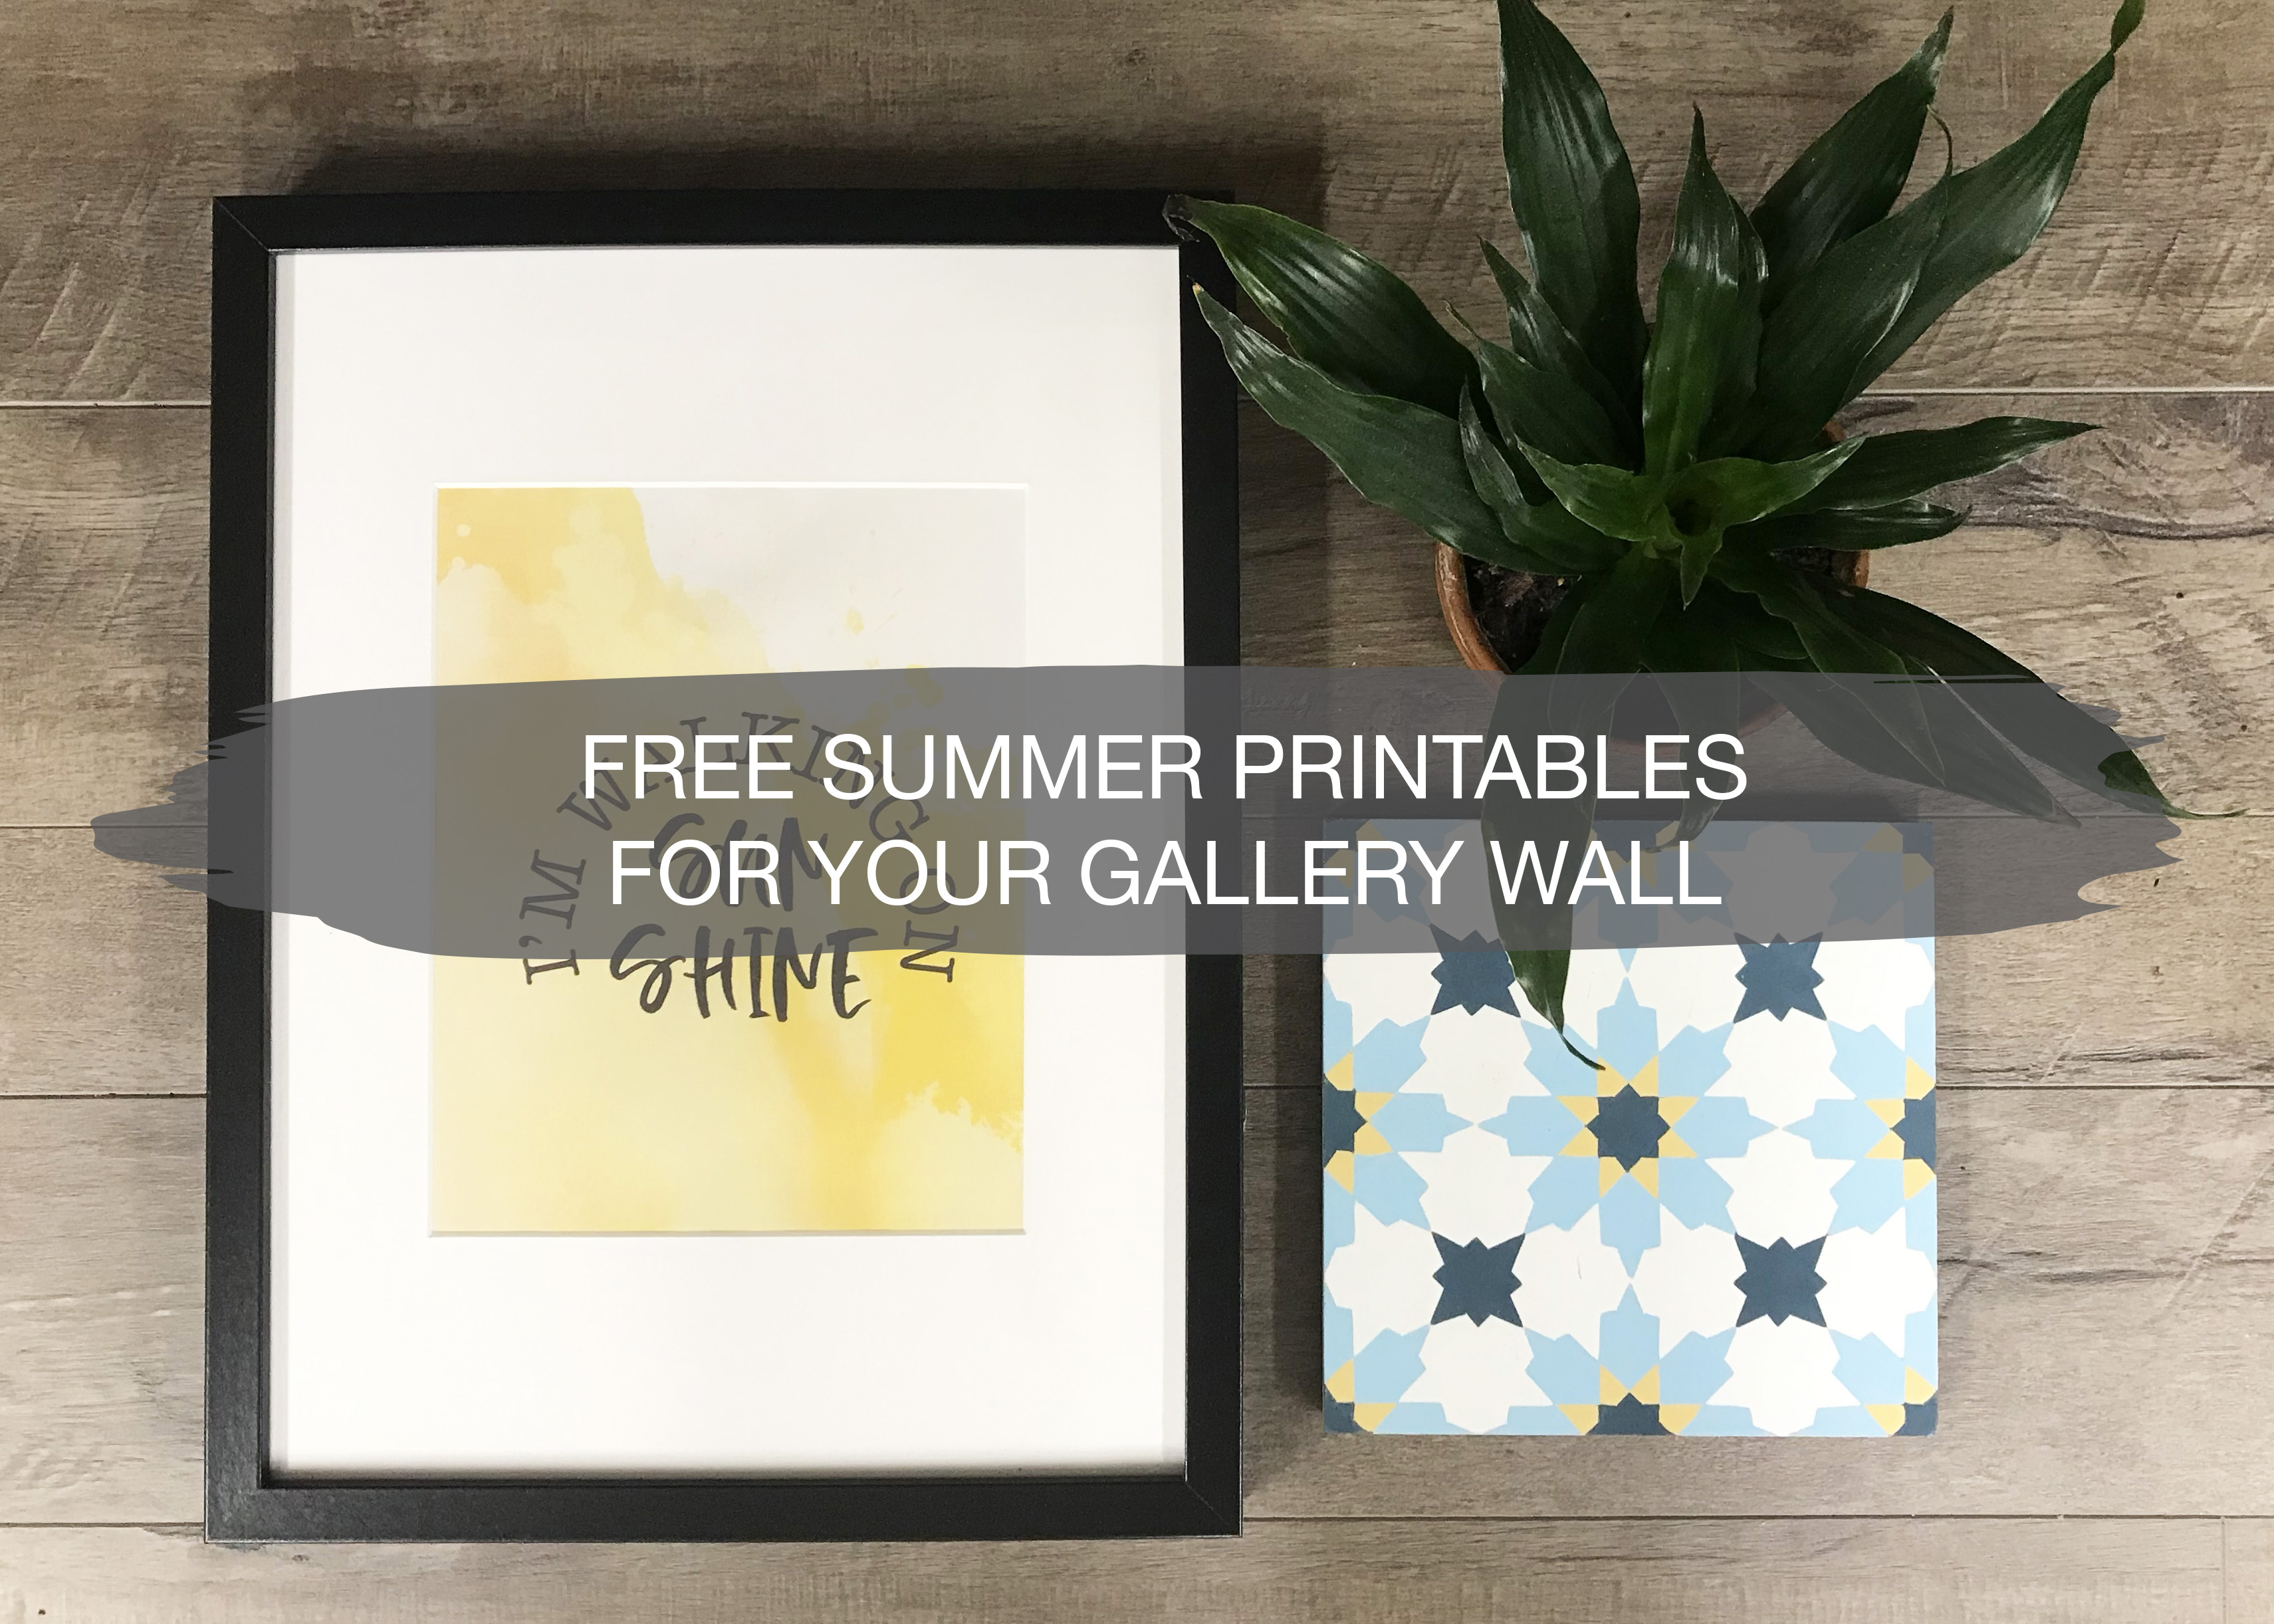 Free Summer Printables for Your Gallery Wall | construction2style